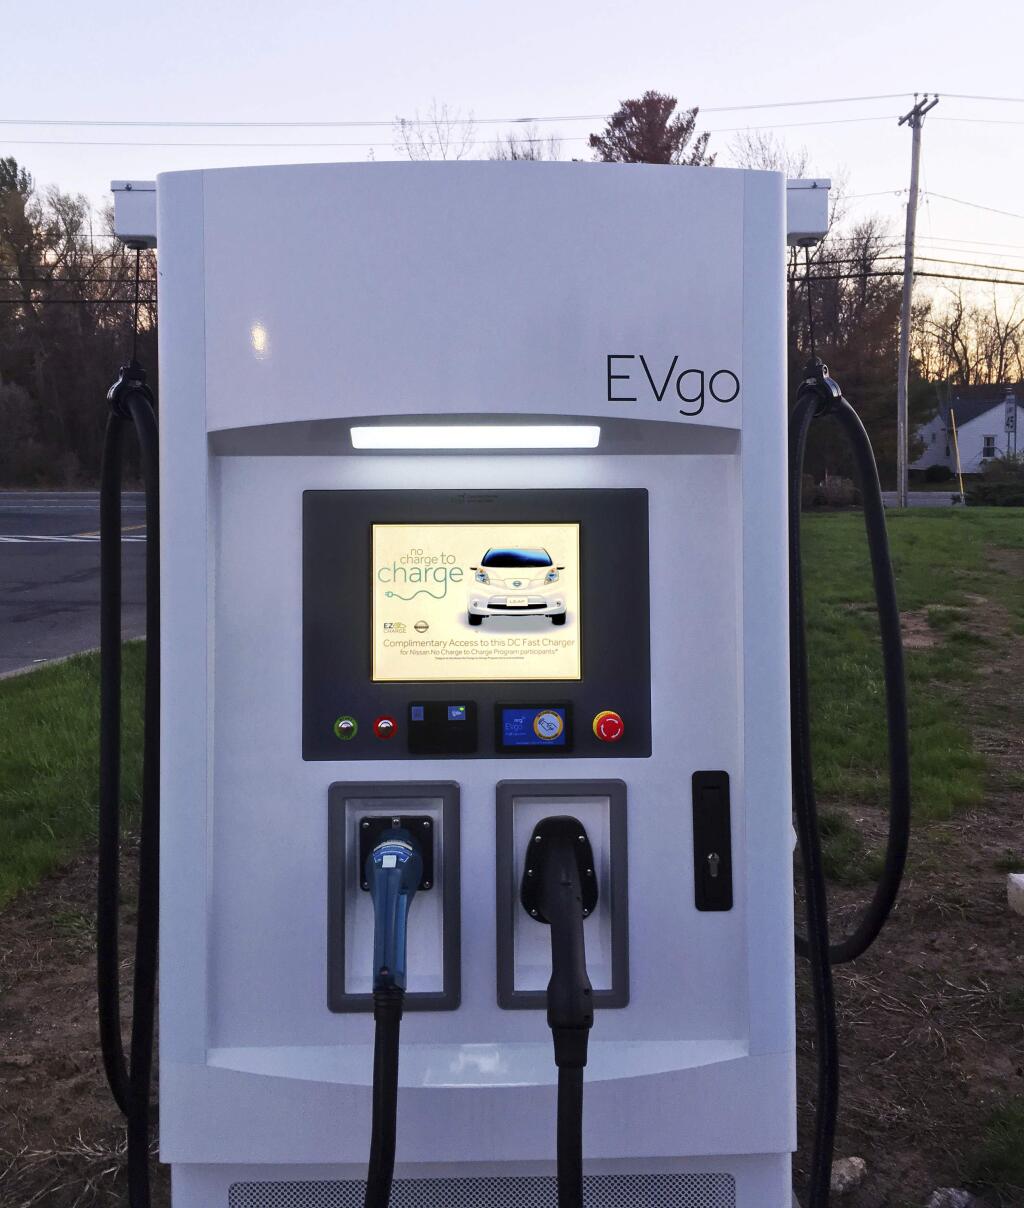 This Monday, April 17, 2017 photo shows a charging station for electric cars in Guilderland, N.Y For drivers of electric cars in remote areas, 'range anxiety' can be more pronounced when the nearest charging station is dozens of miles away over winding roads. Cold winters take a bite out of battery power, as do steep hills. (AP Photo/Michael Hill)